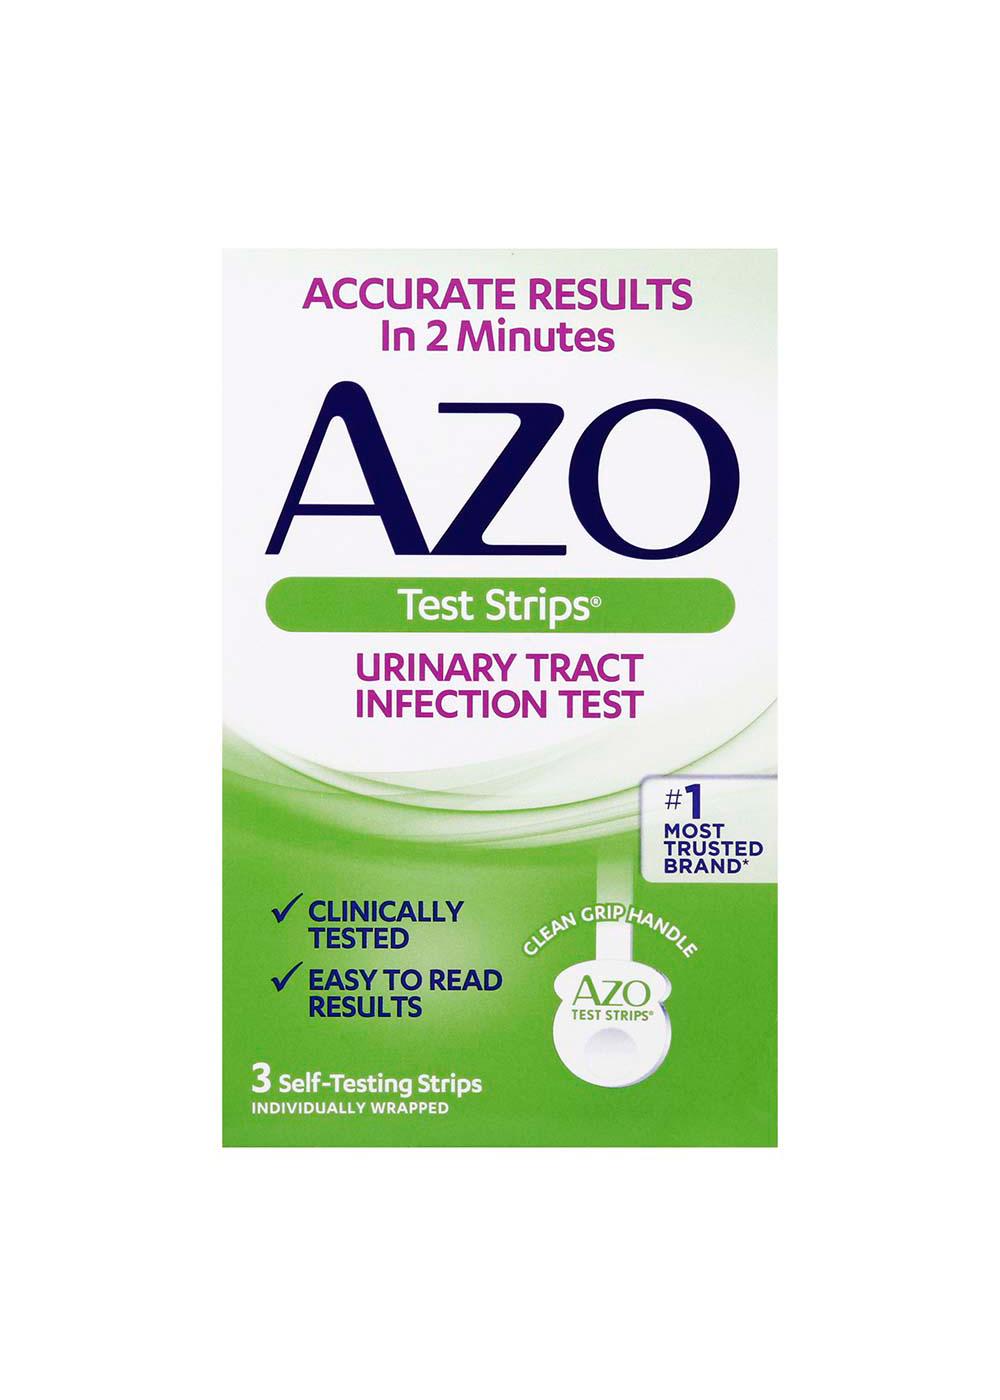 Azo Urinary Tract Infection Test Strips; image 1 of 6